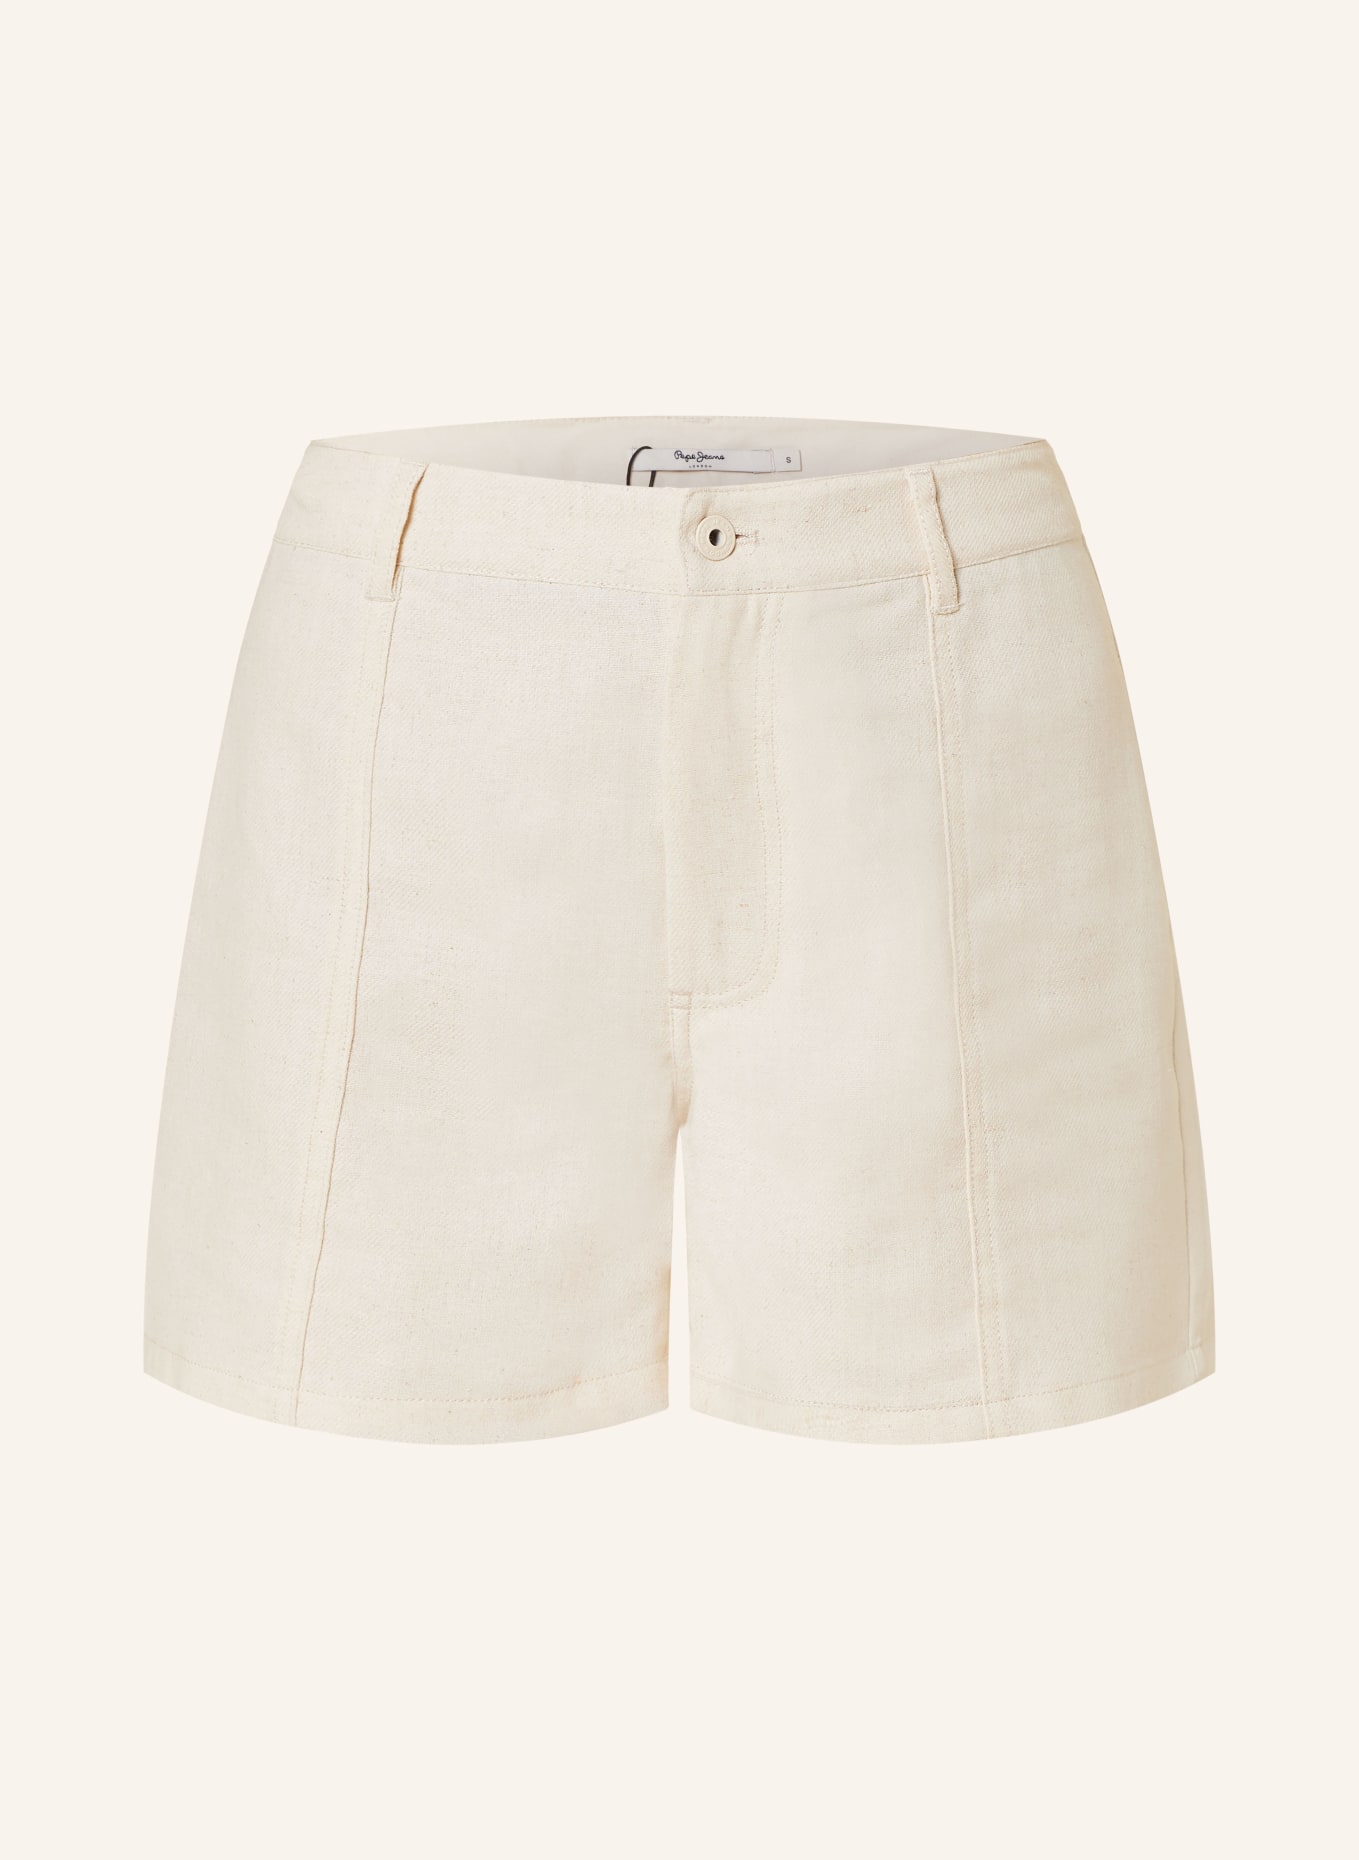 Pepe Jeans Shorts TILLY, Farbe: CREME (Bild 1)